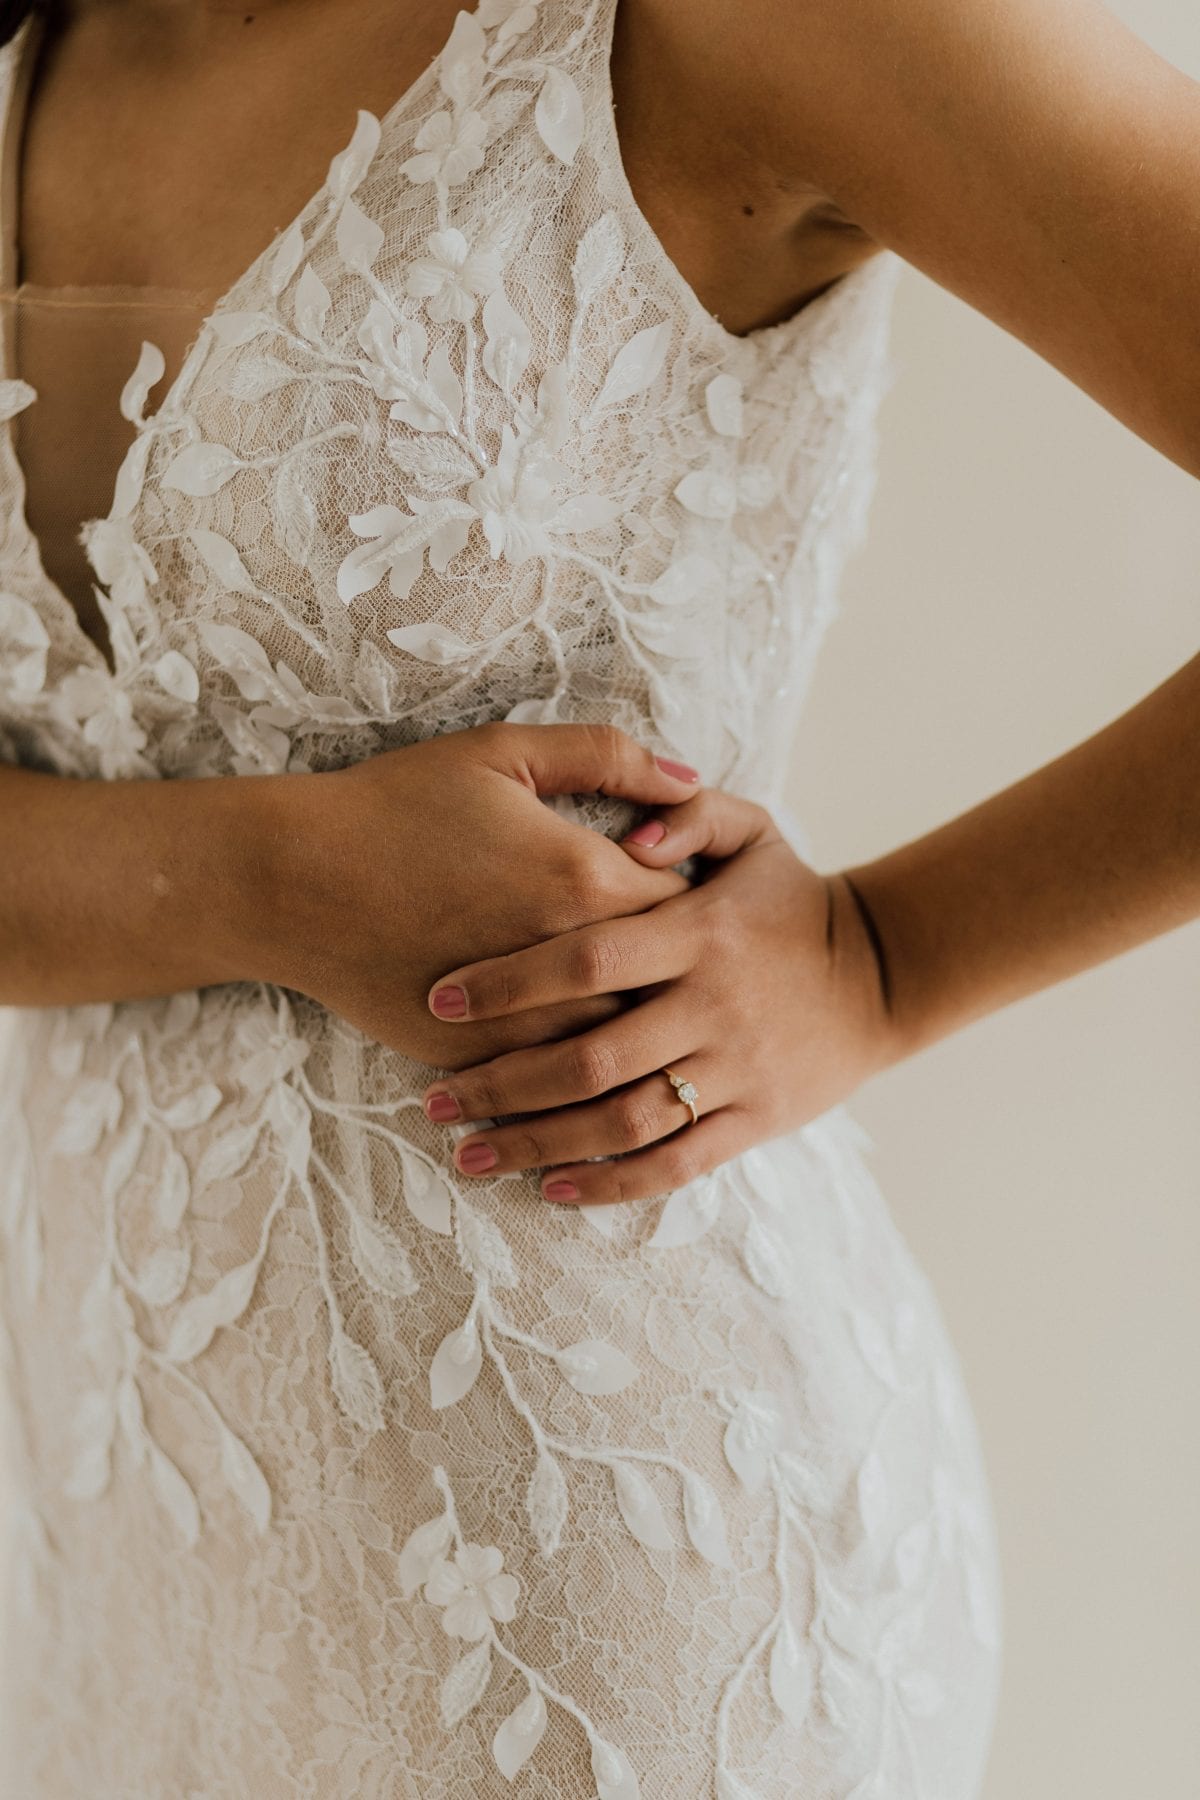 Details of bride's ring and wedding dress